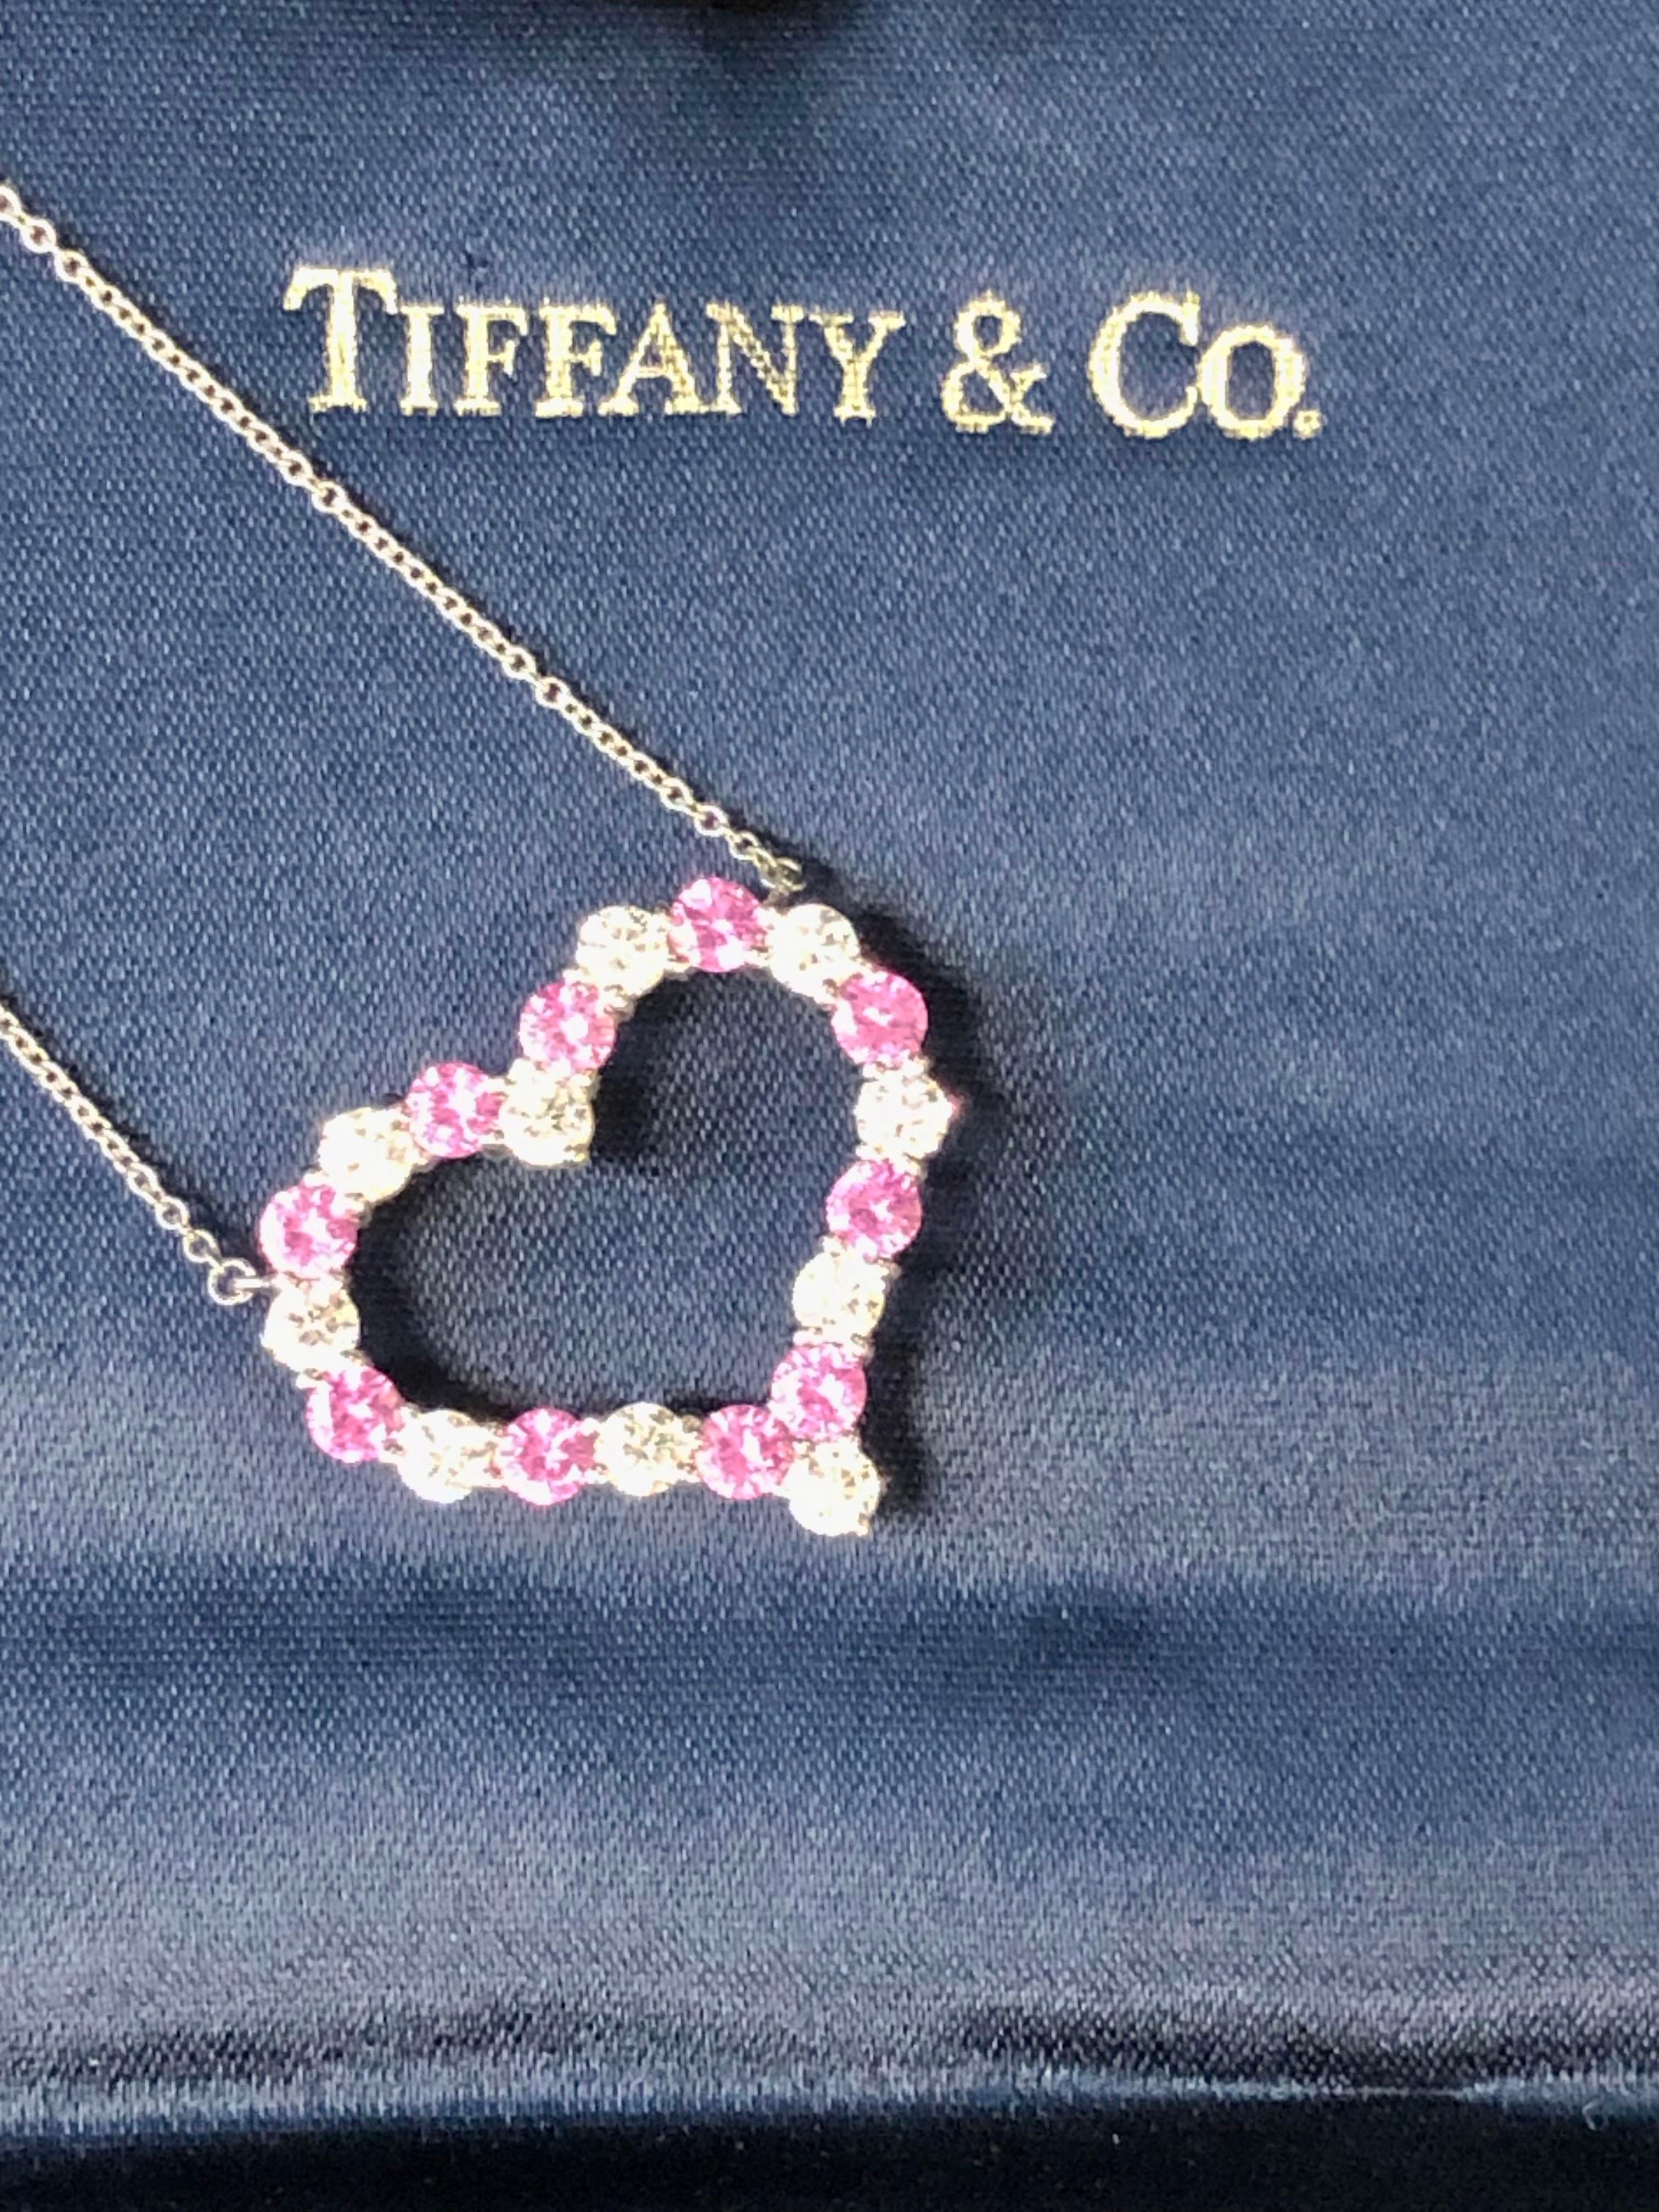 Circa: 2018 Tiffany & Company Platinum Open Heart Pendant Necklace, the Heart measures 1 X 7/8 inch and is set with Round Brilliant cut Diamonds totaling 1 Carat and grading as G in color and VS clarity, further set with Round Pink Sapphires of very